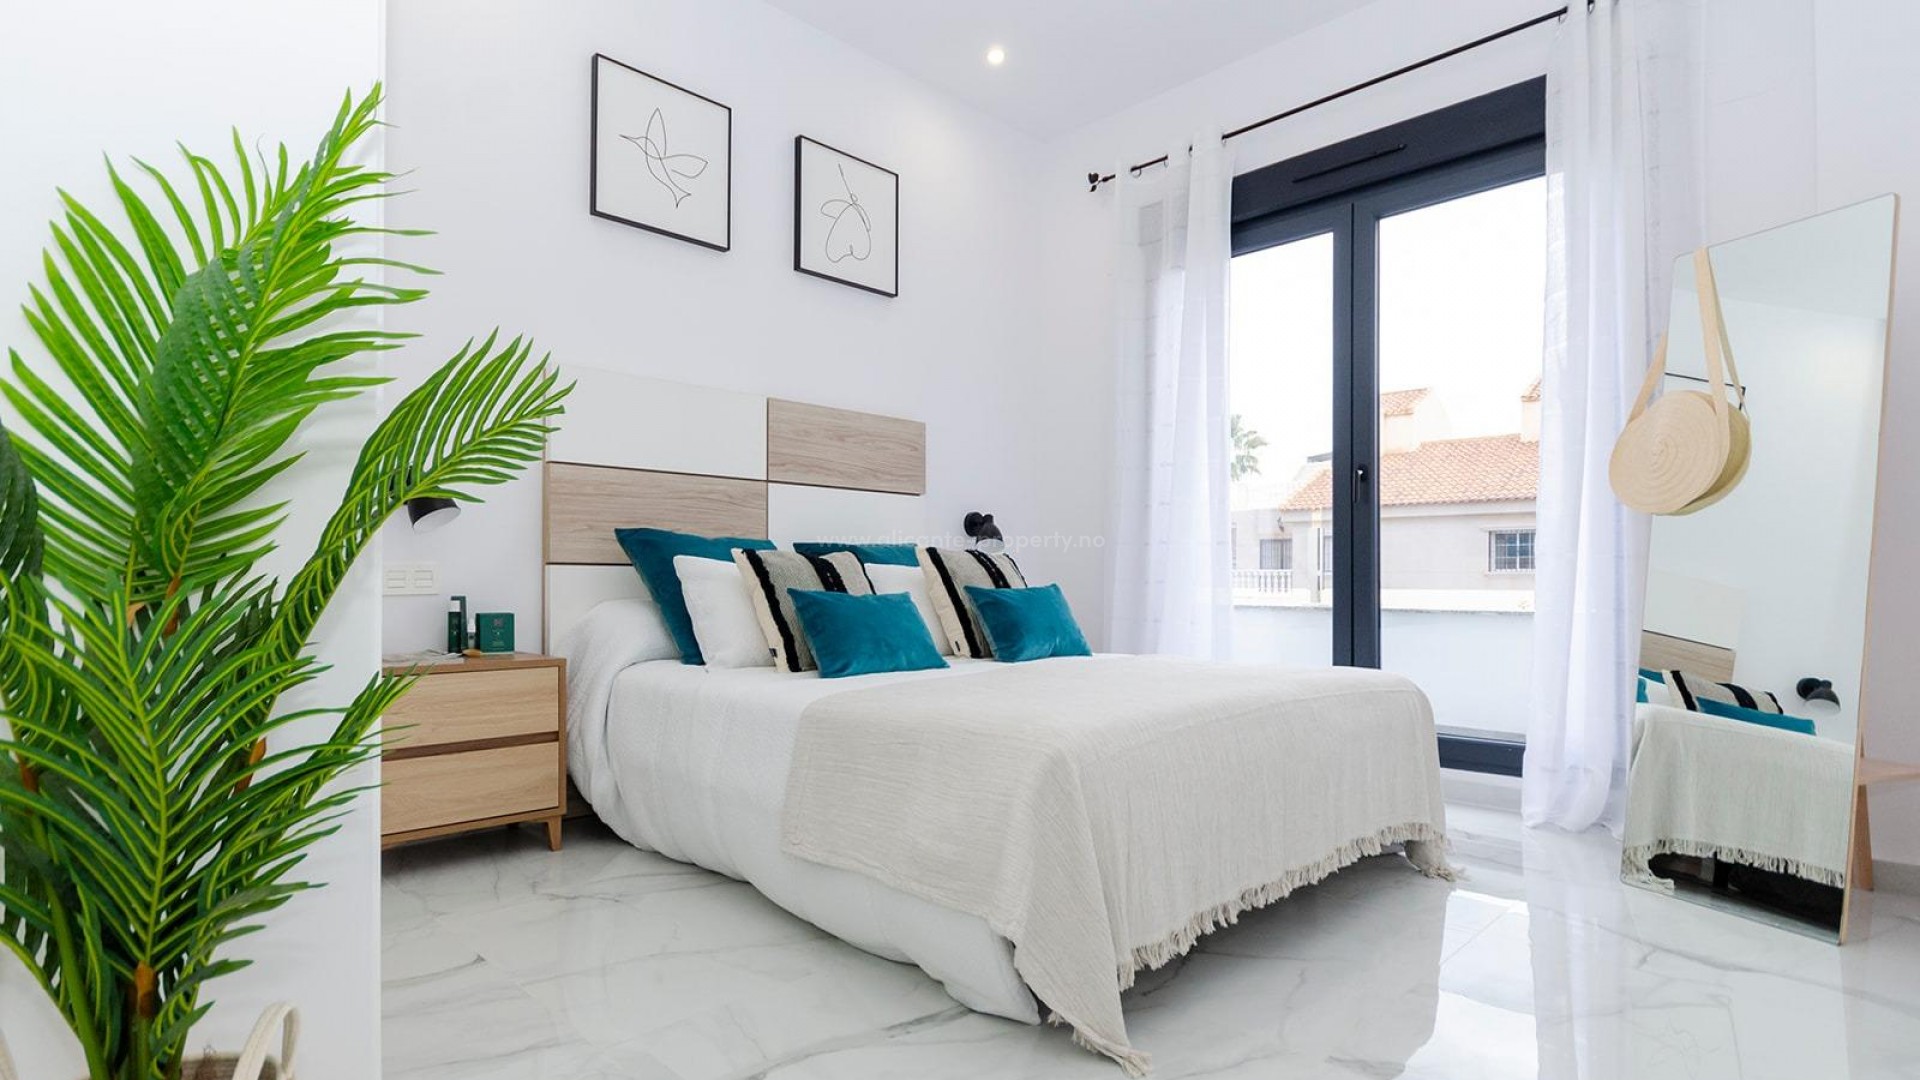 New villas/houses in Torreta, Torrevieja, 3 bedrooms, 3 bathrooms, terrace, private solarium, open kitchen with living room, garden with private pool and parking.